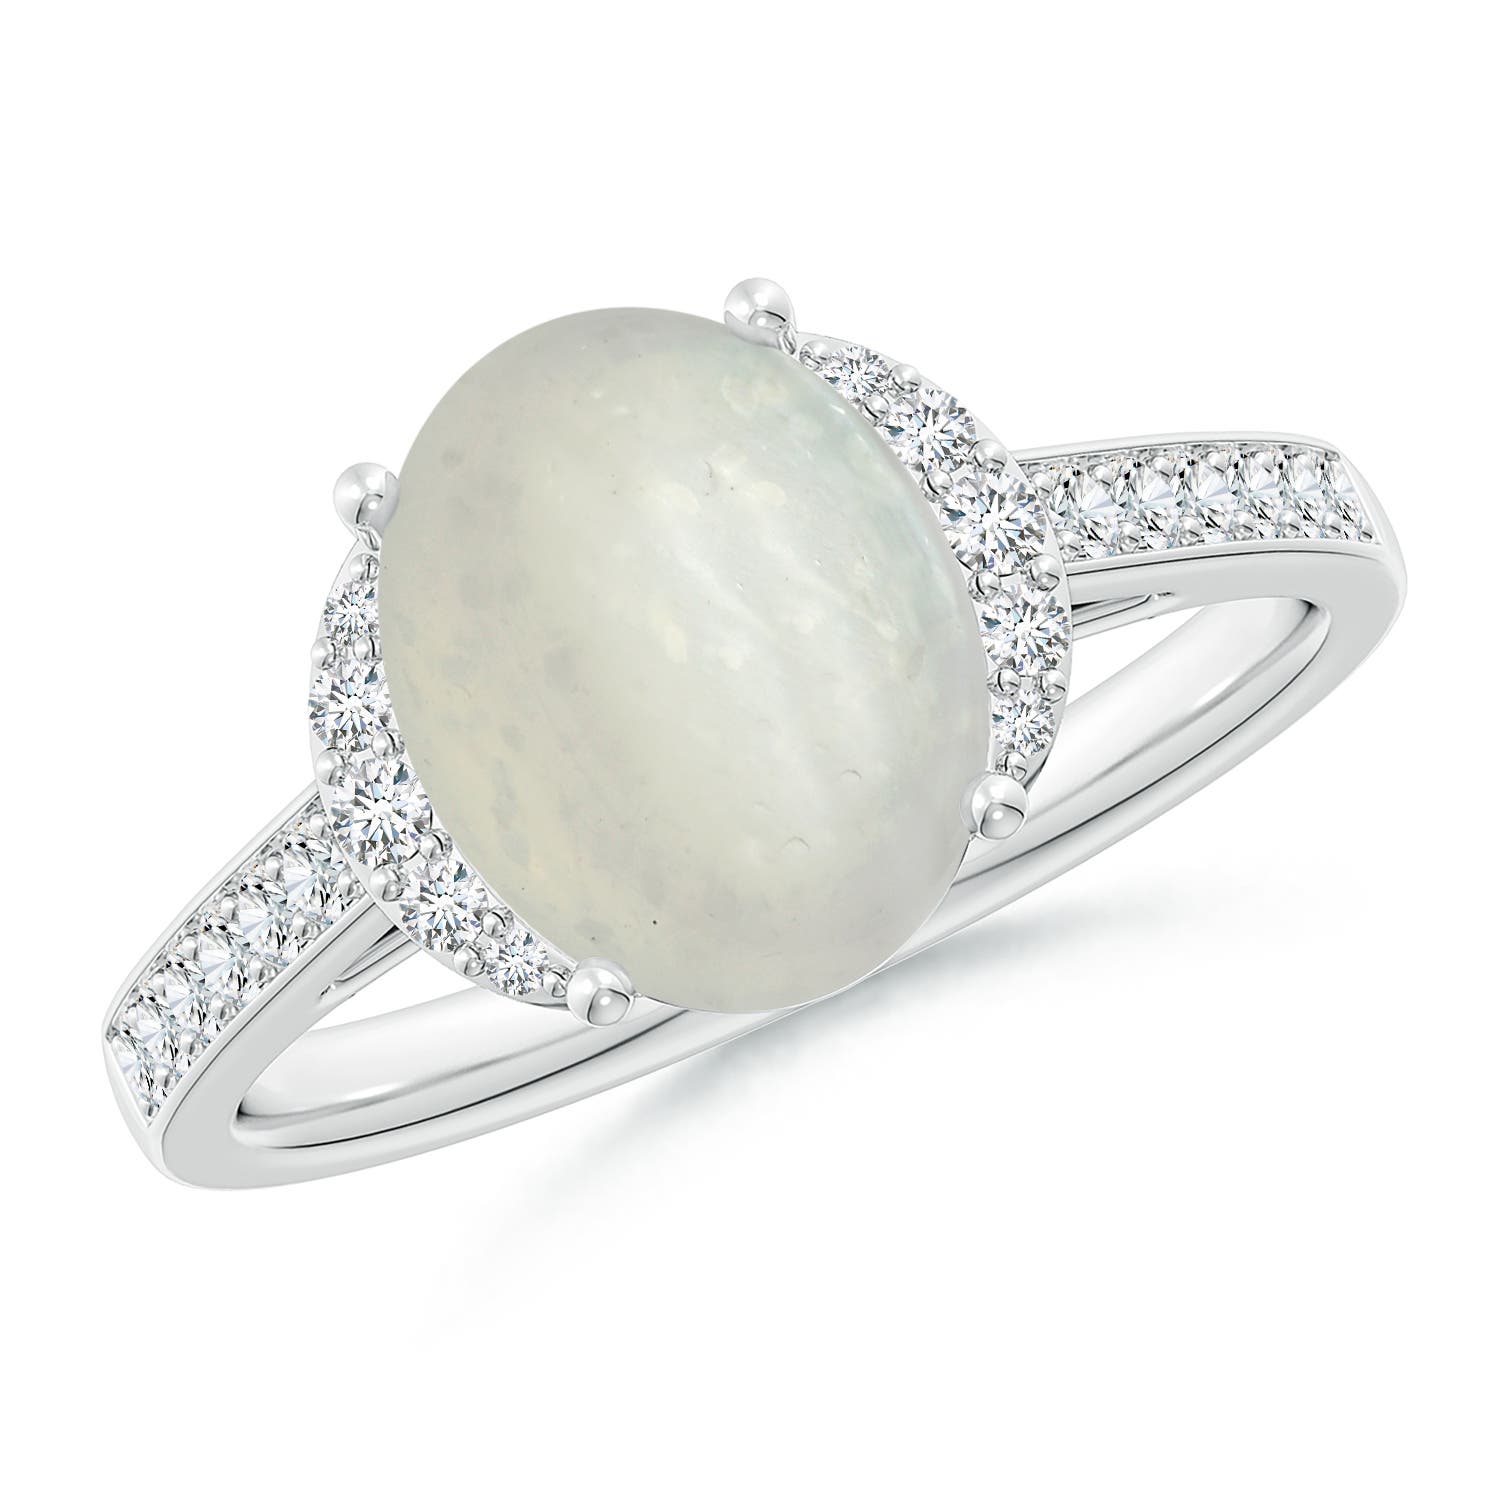 A - Moonstone / 2.75 CT / 14 KT White Gold